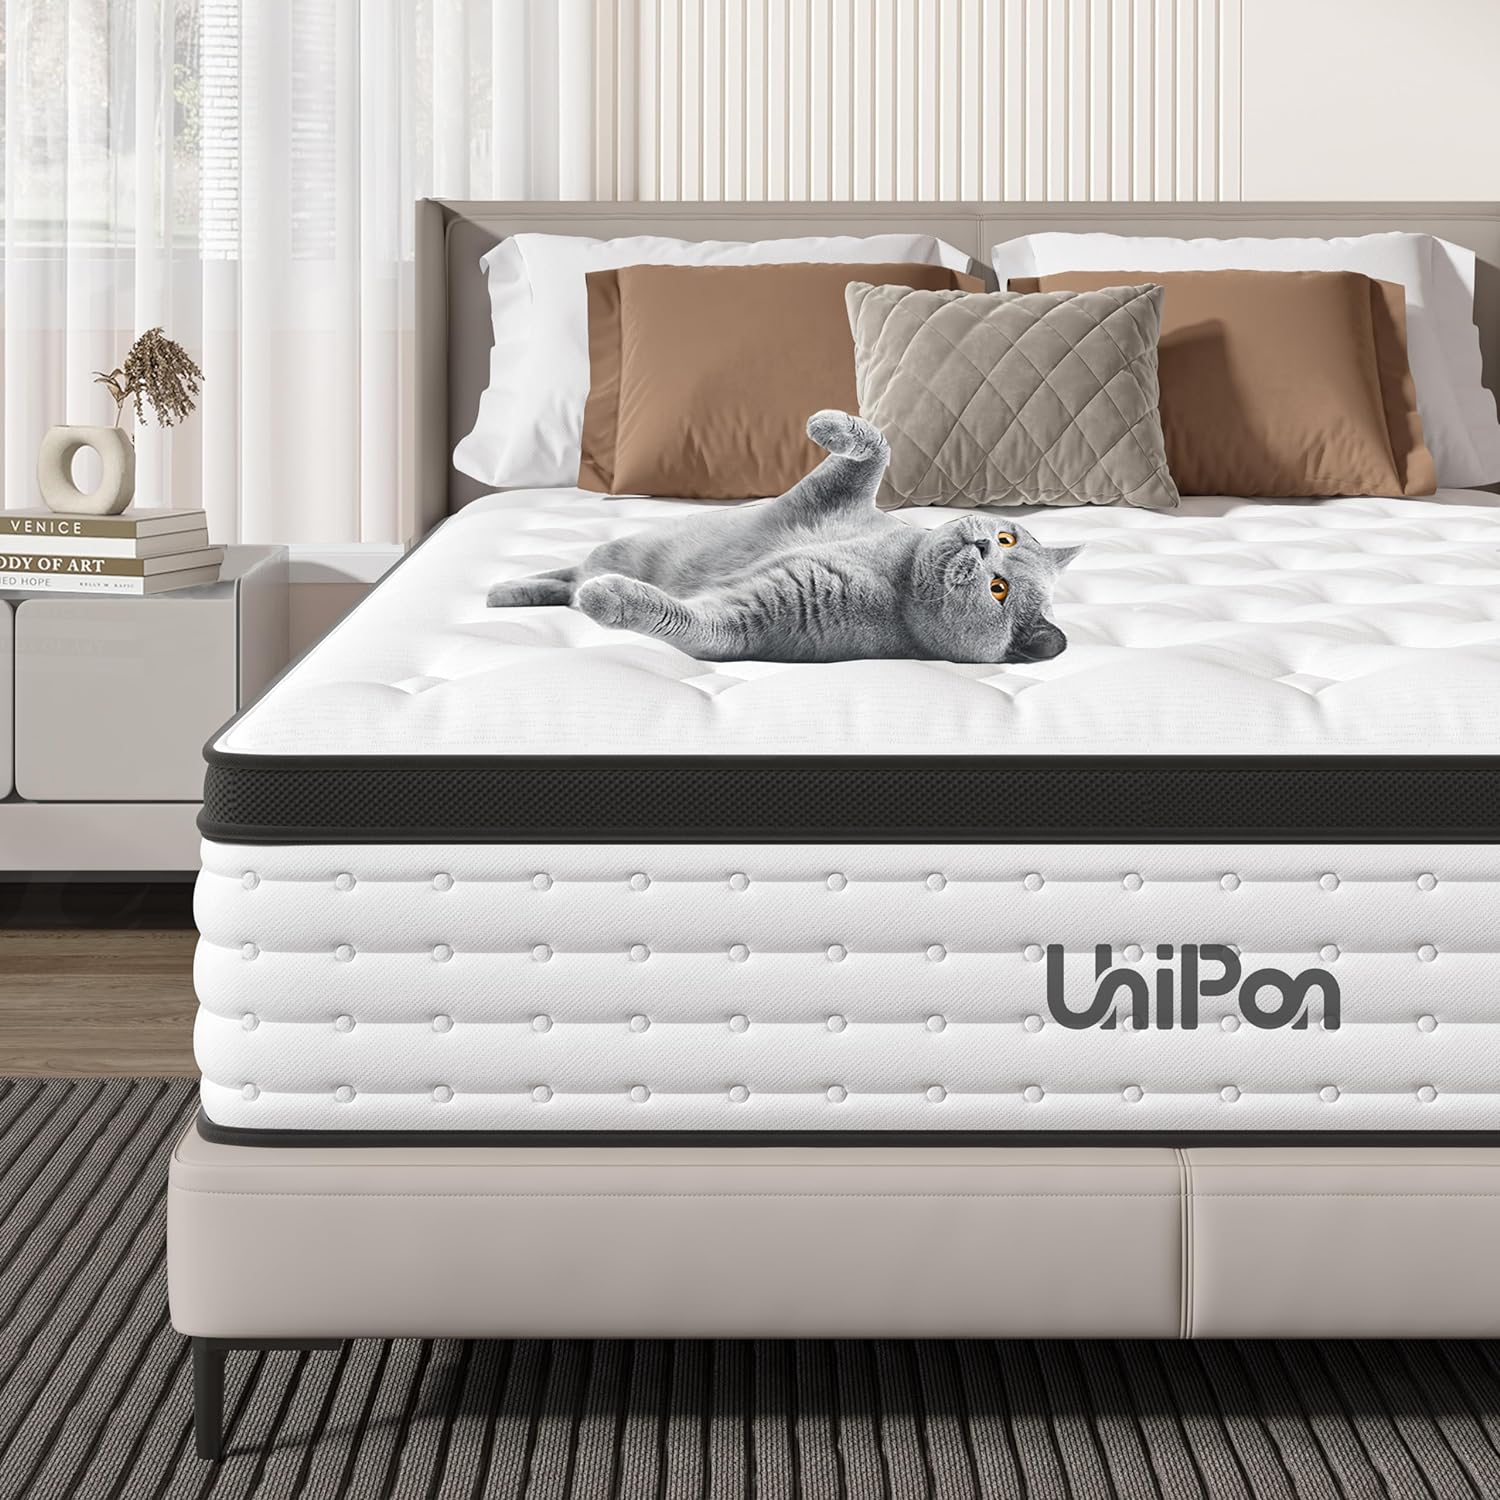 UniPon 12 Inch Hybrid Mattress Queen, Spring Mattress with Gel Memory Foam, Medium Firm Mattress, Made in USA, Supportive Individually Pocket Spring Mattress, Bed in a Box, Pressure Relief